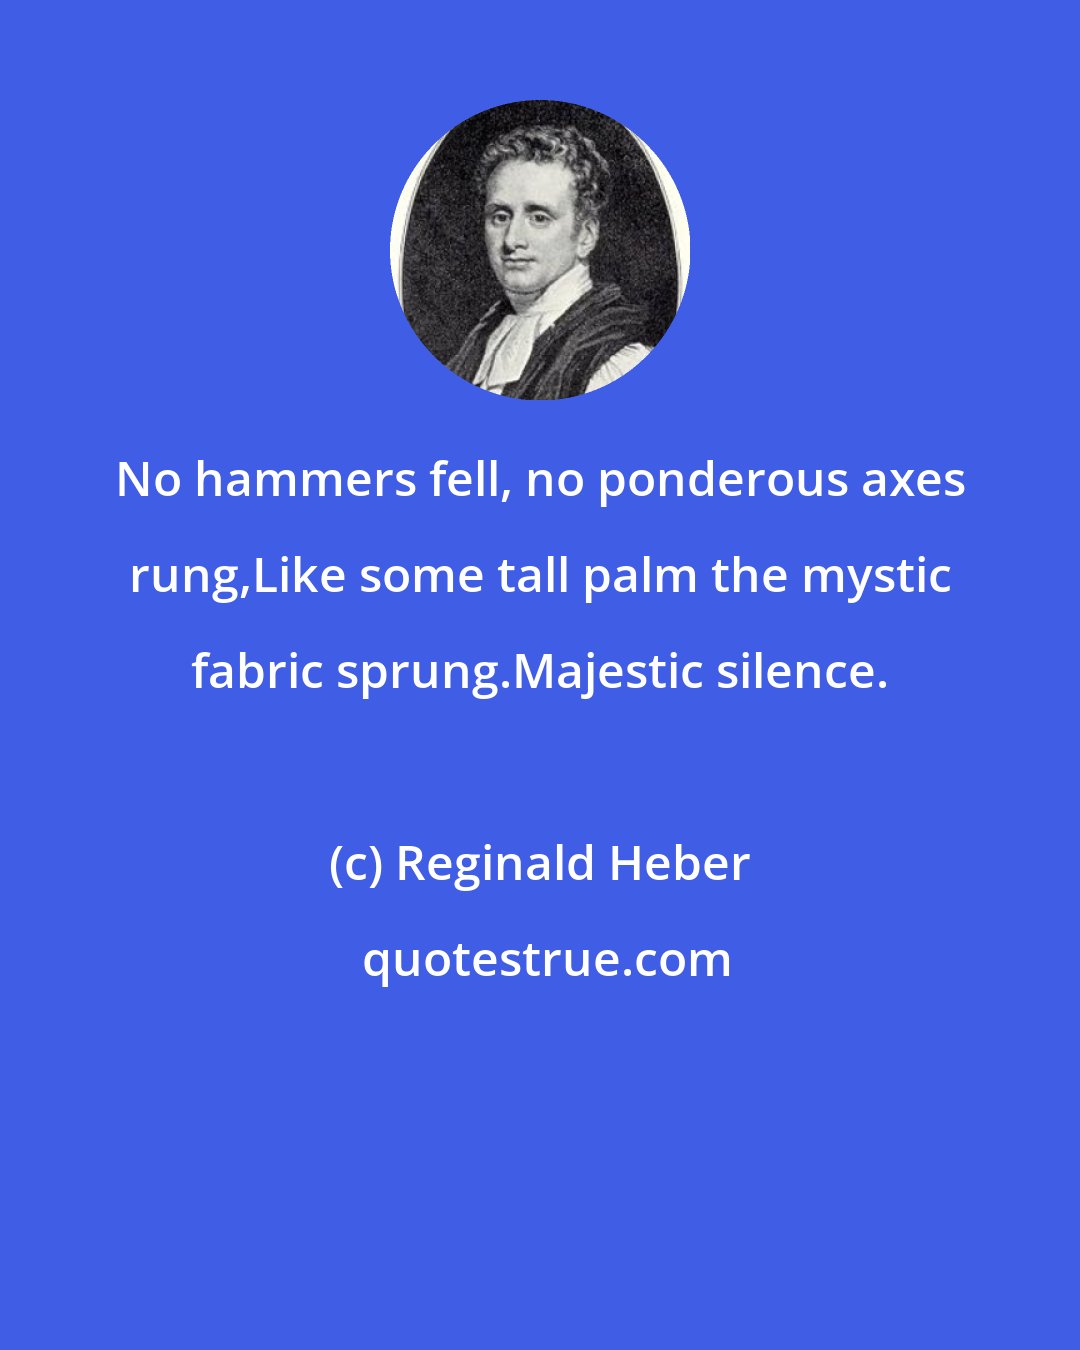 Reginald Heber: No hammers fell, no ponderous axes rung,Like some tall palm the mystic fabric sprung.Majestic silence.